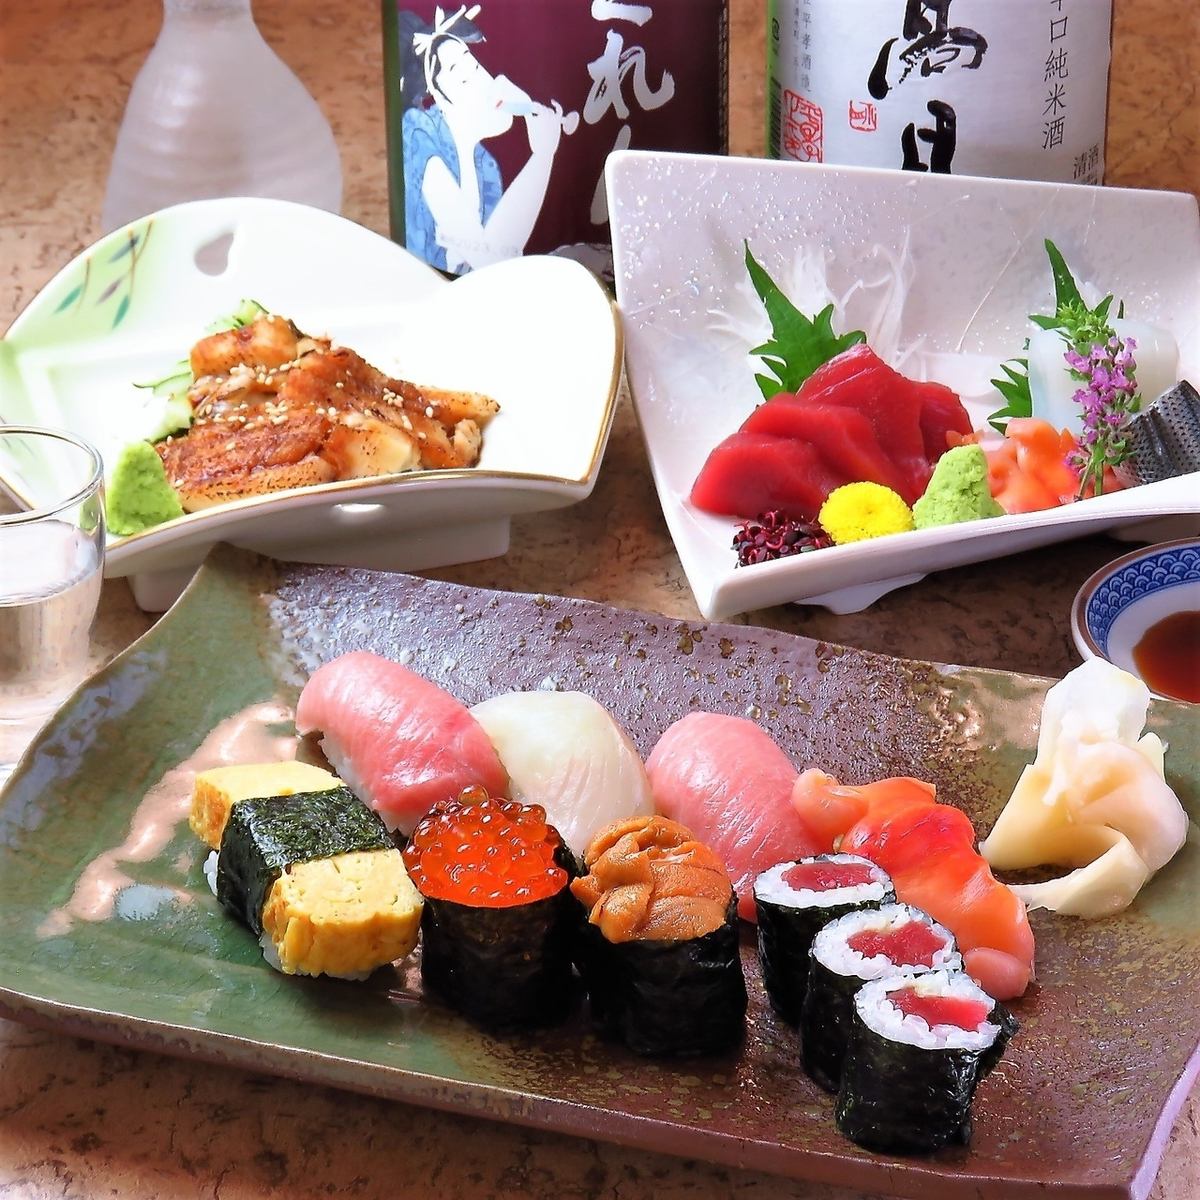 Enjoy our specialty sushi, seafood dishes, and sake in a calm space